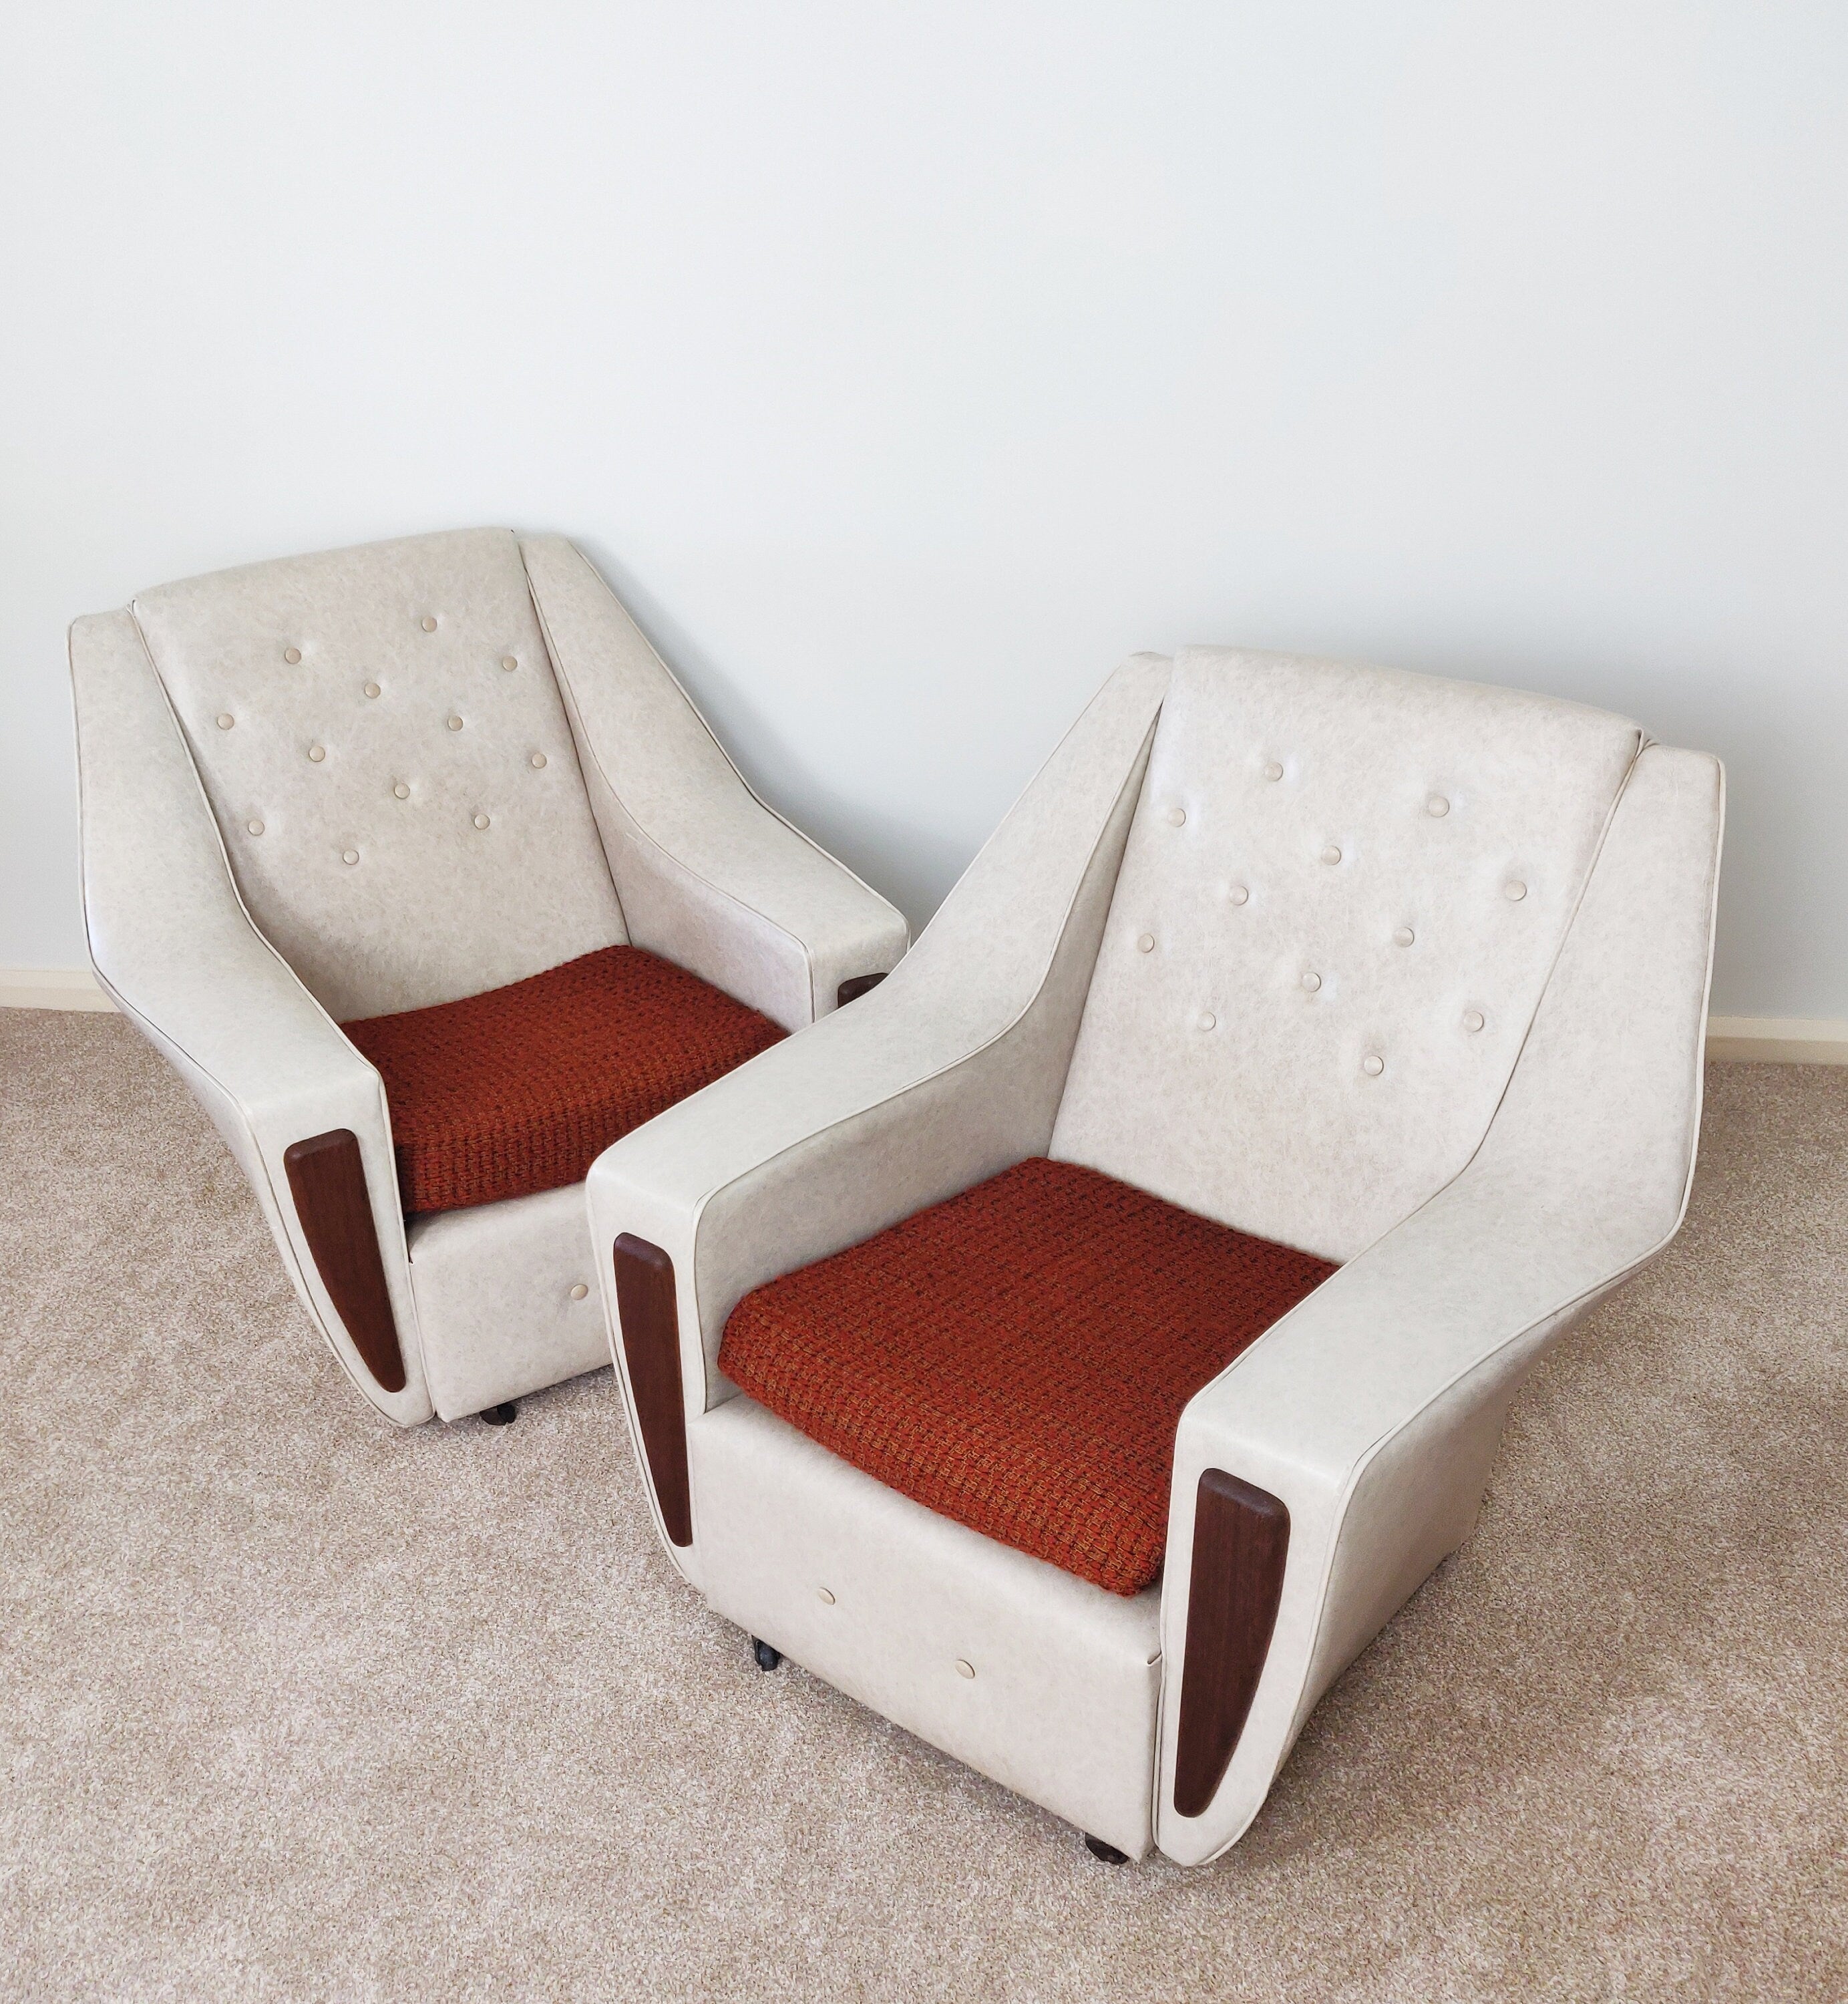 A Pair of Mid Century Lounge Chairs, Vintage Leatherette Danish Style Armchairs, Retro